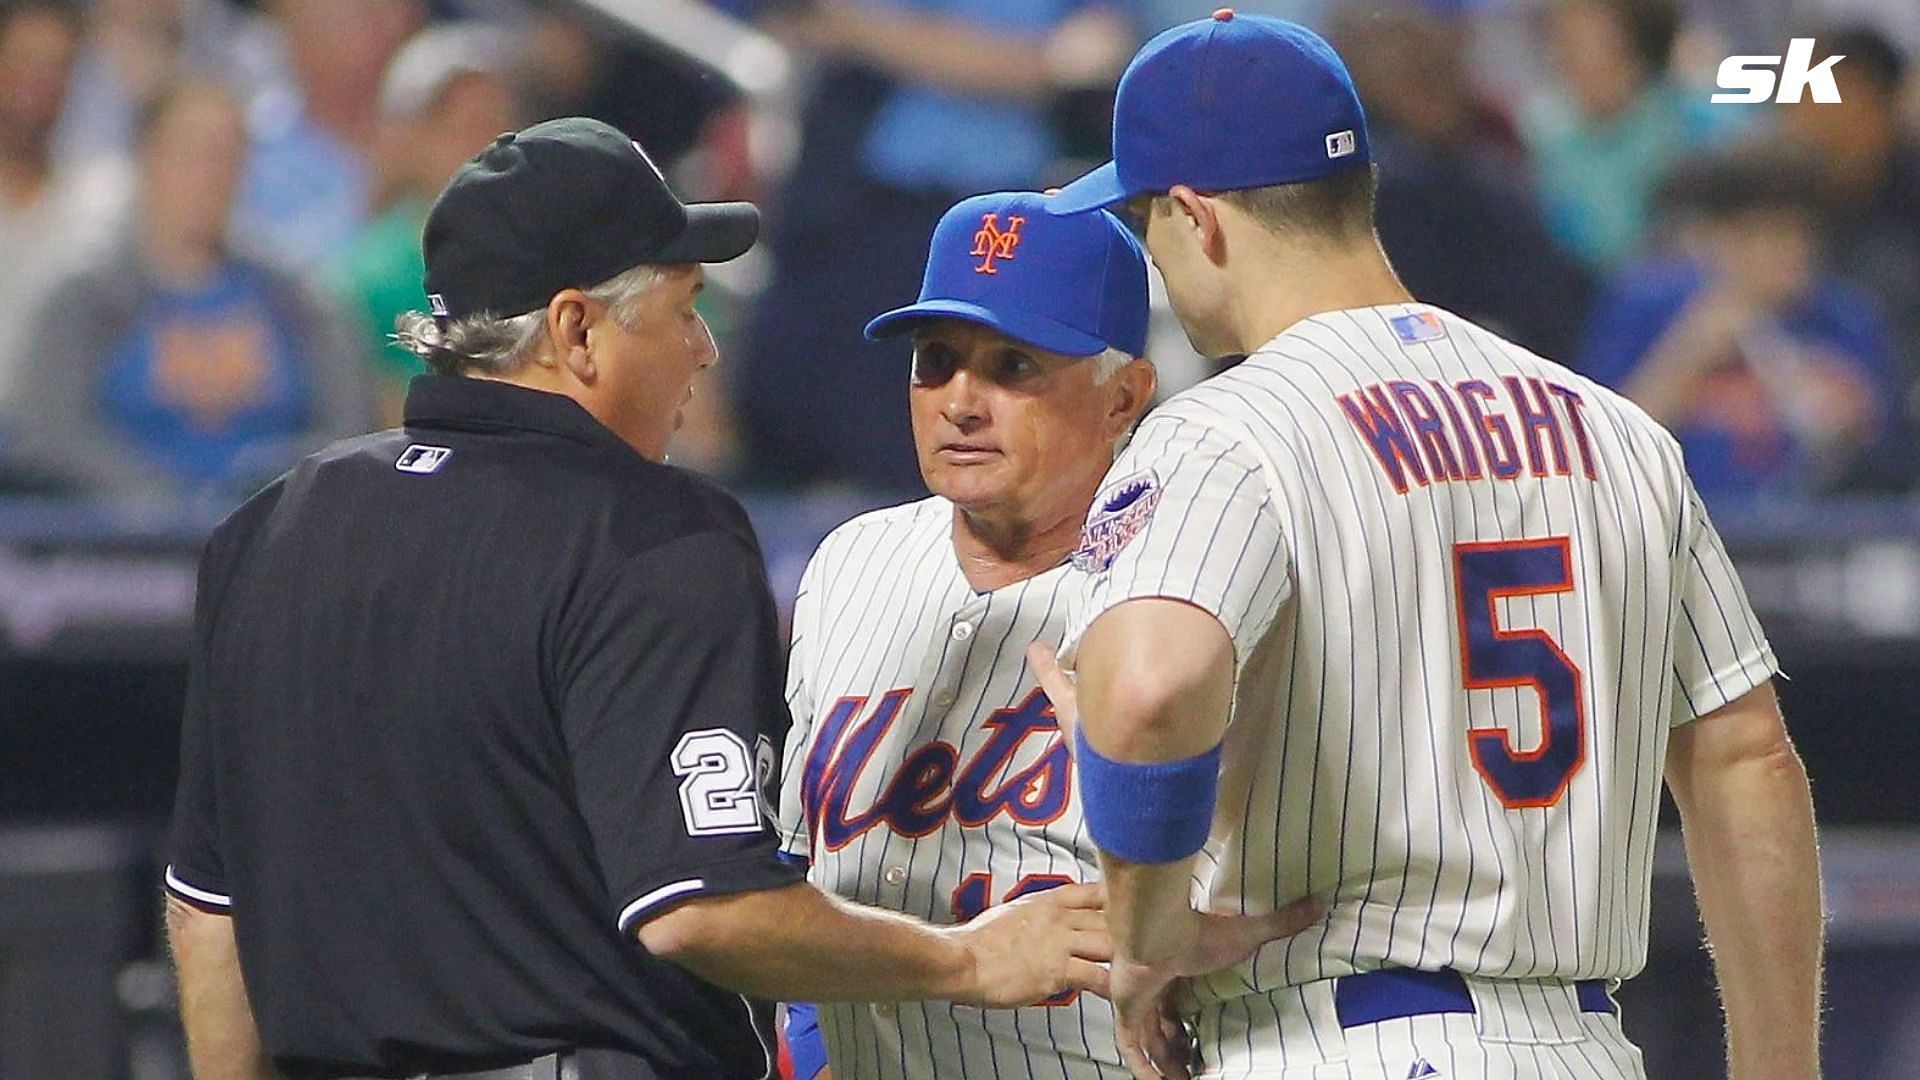 Fans appreciate how retiring MLB umpire Tom Hallion handled on-field situation with Terry Collins